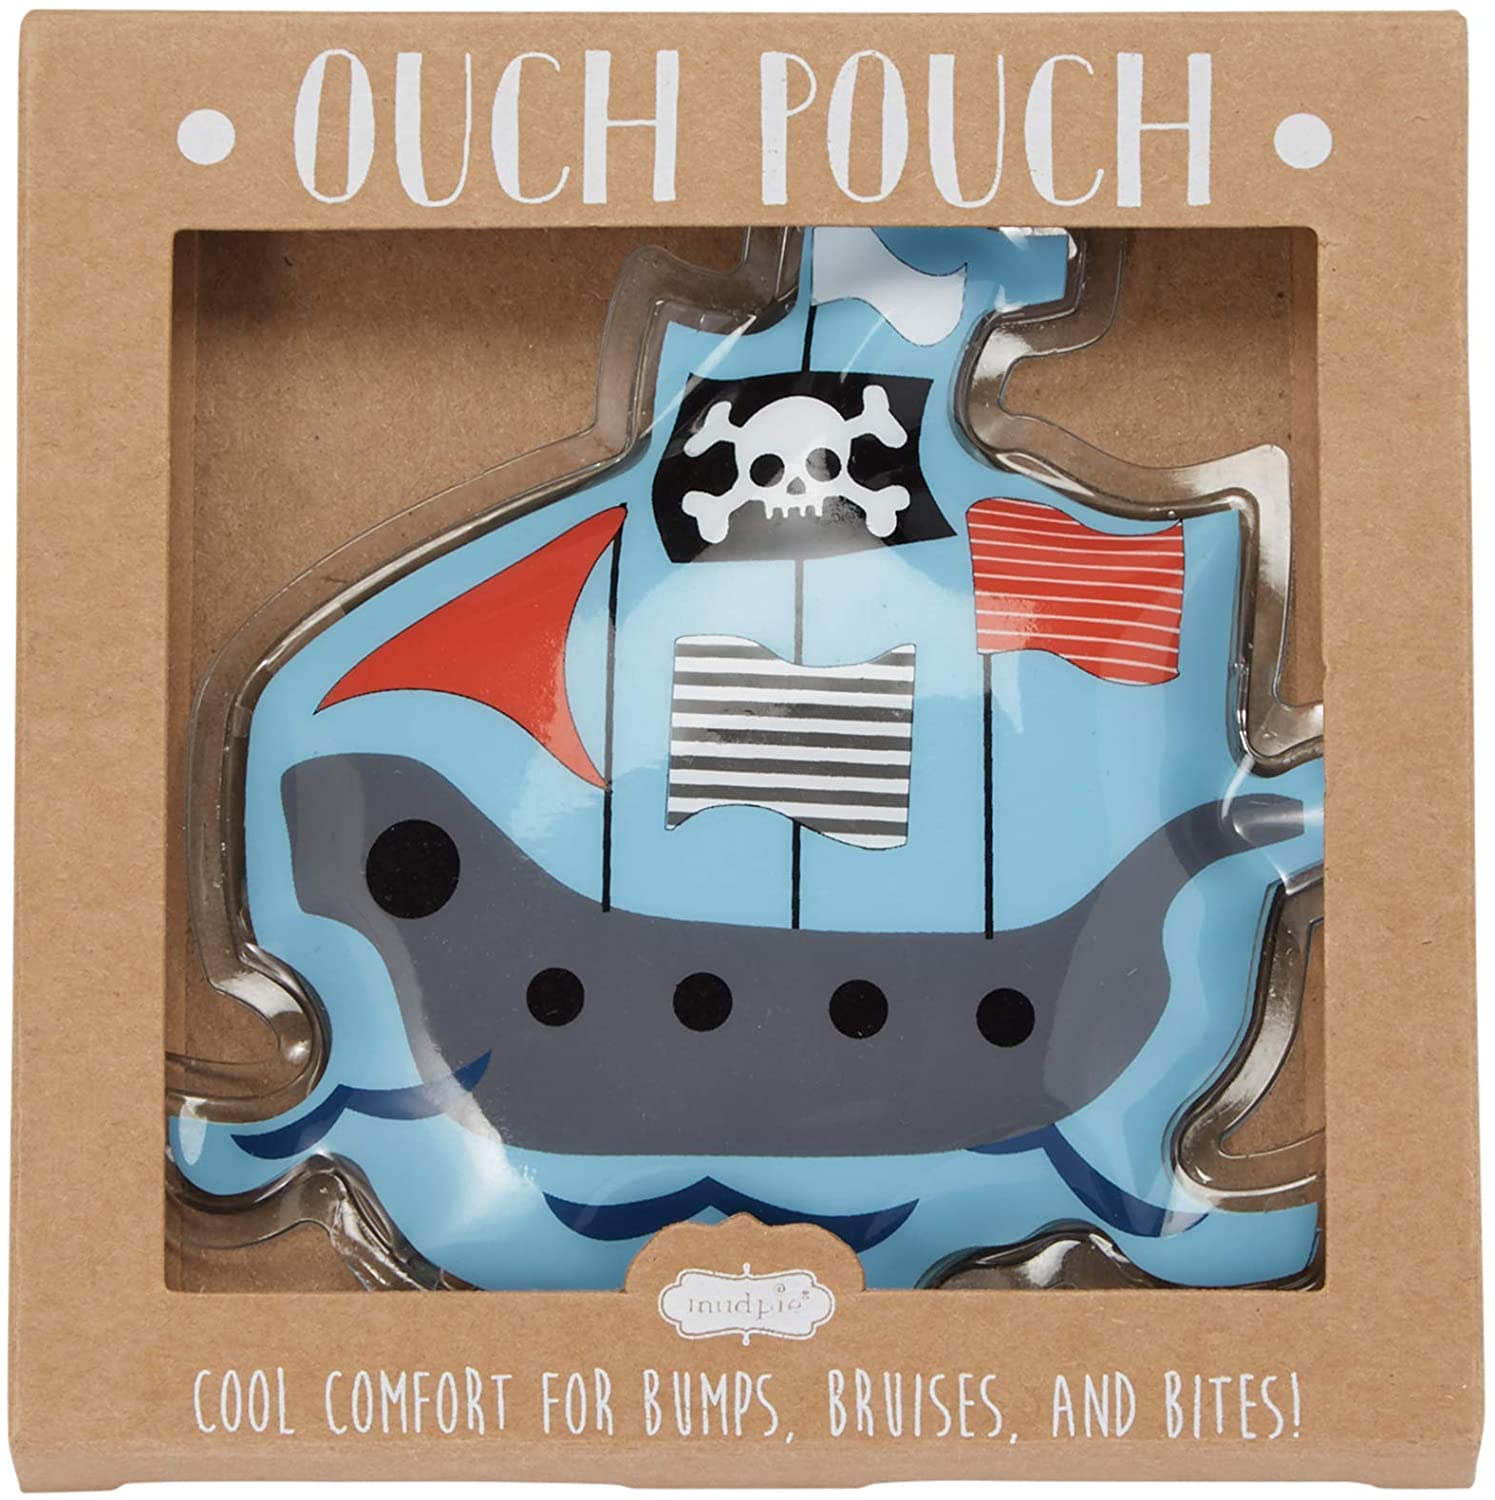  Ouch Pouch